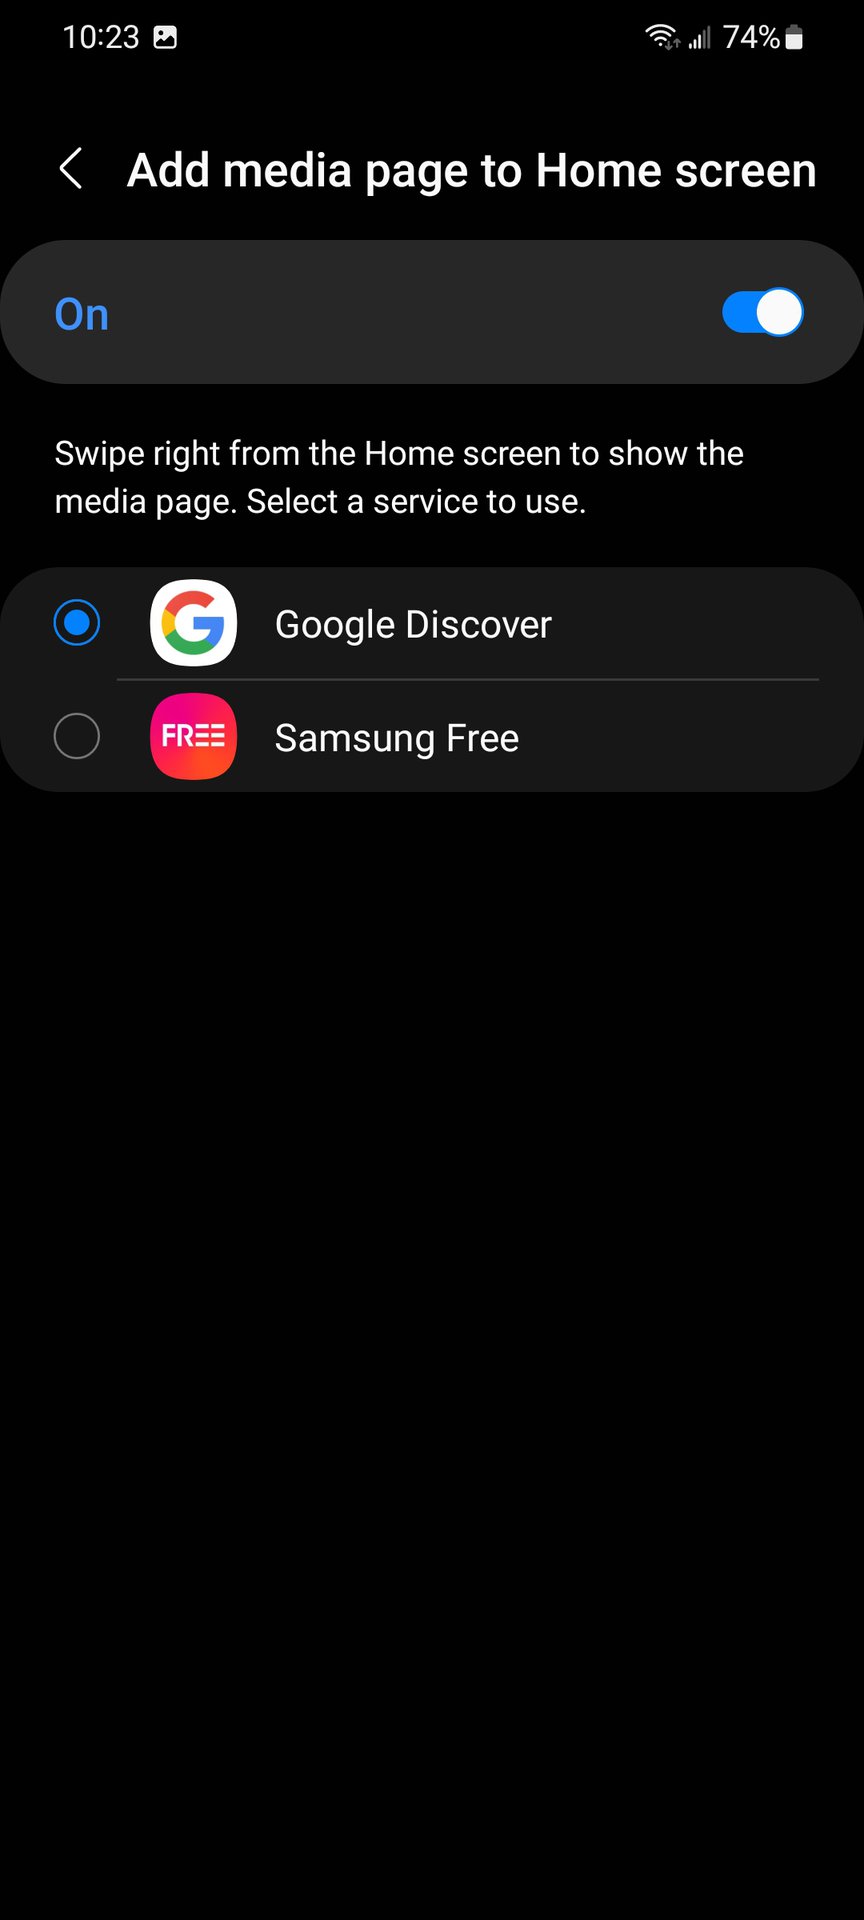 Add free google or samsung discover to homepage